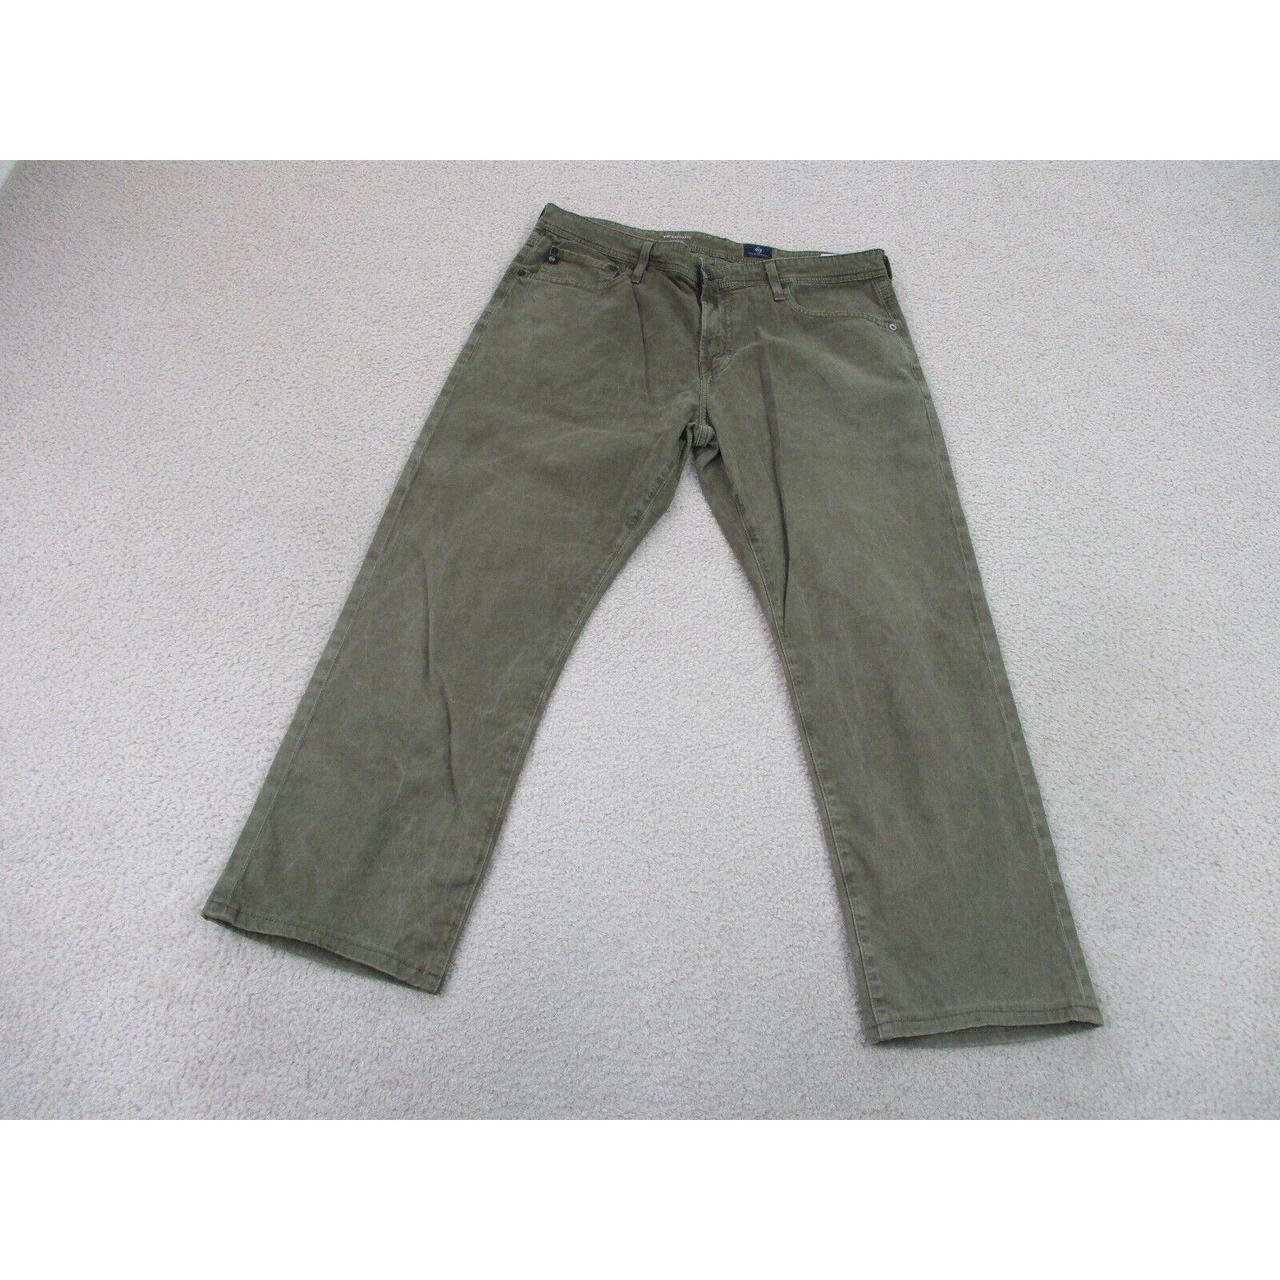 Product Image 2 - Adriano Goldschmied Pants Mens 36